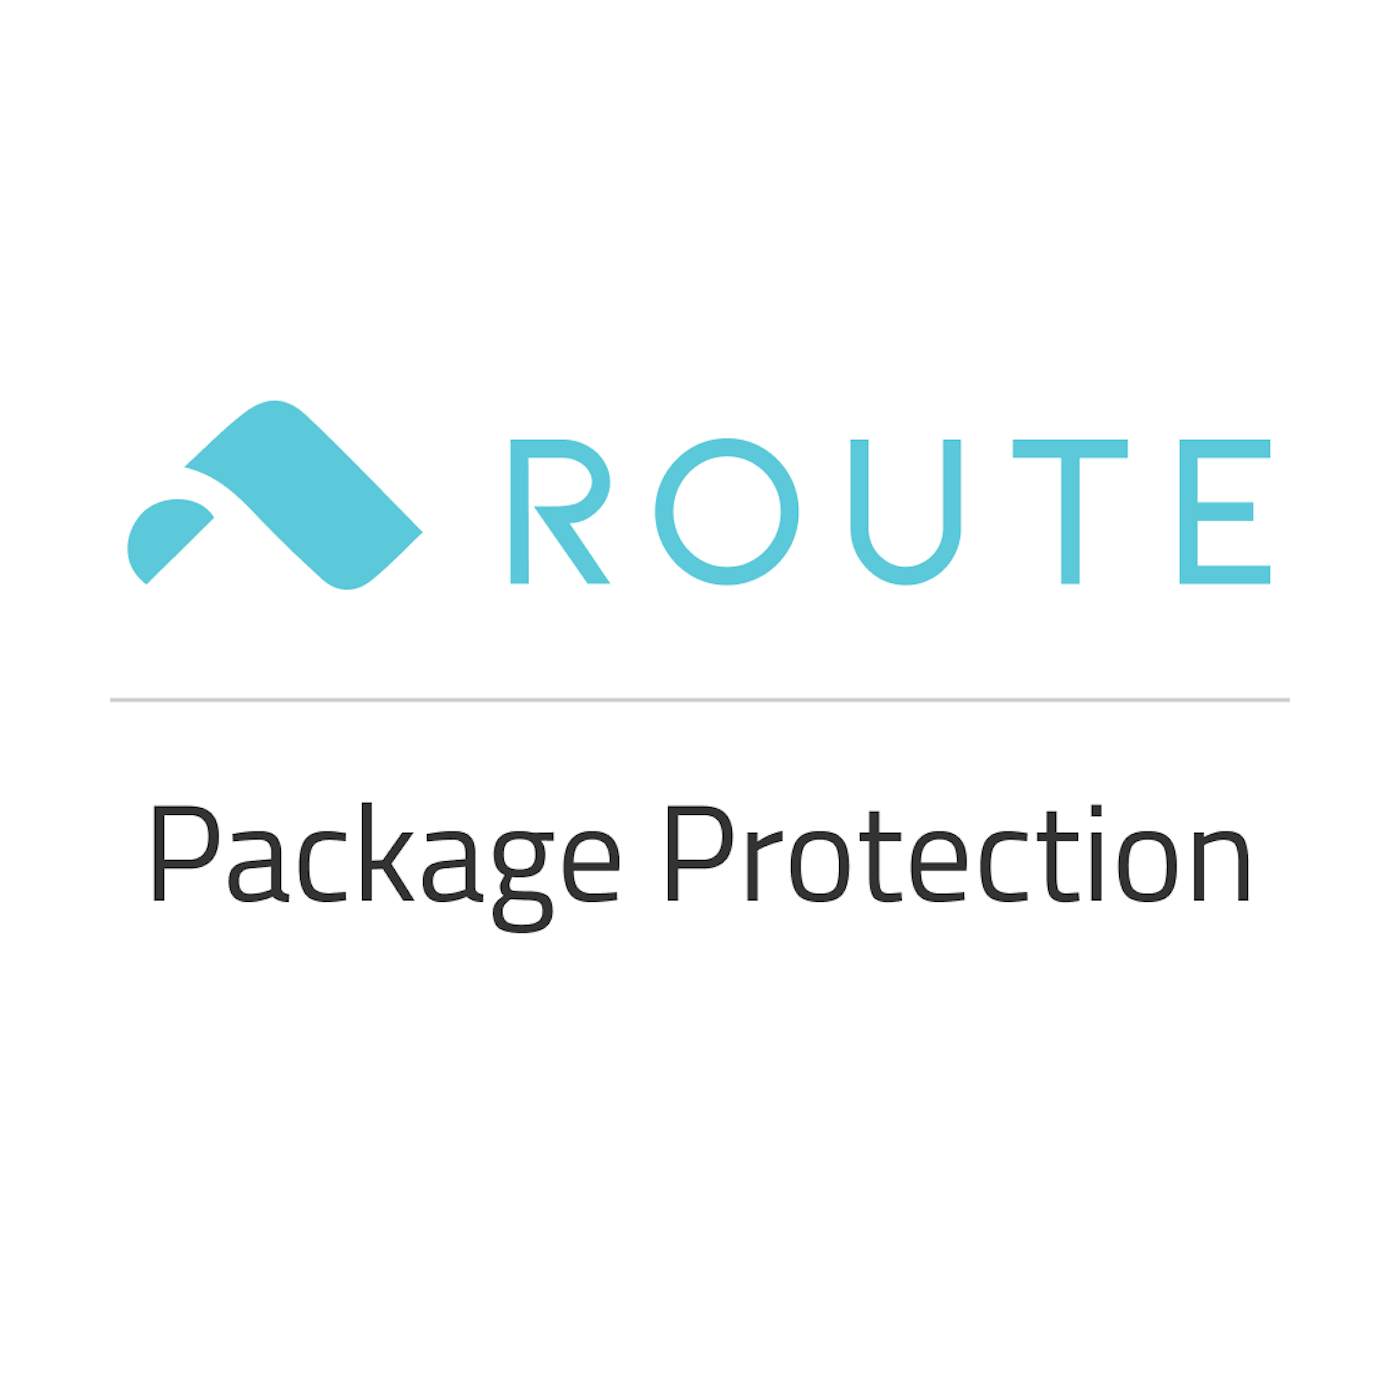 The Struts Route Package Protection